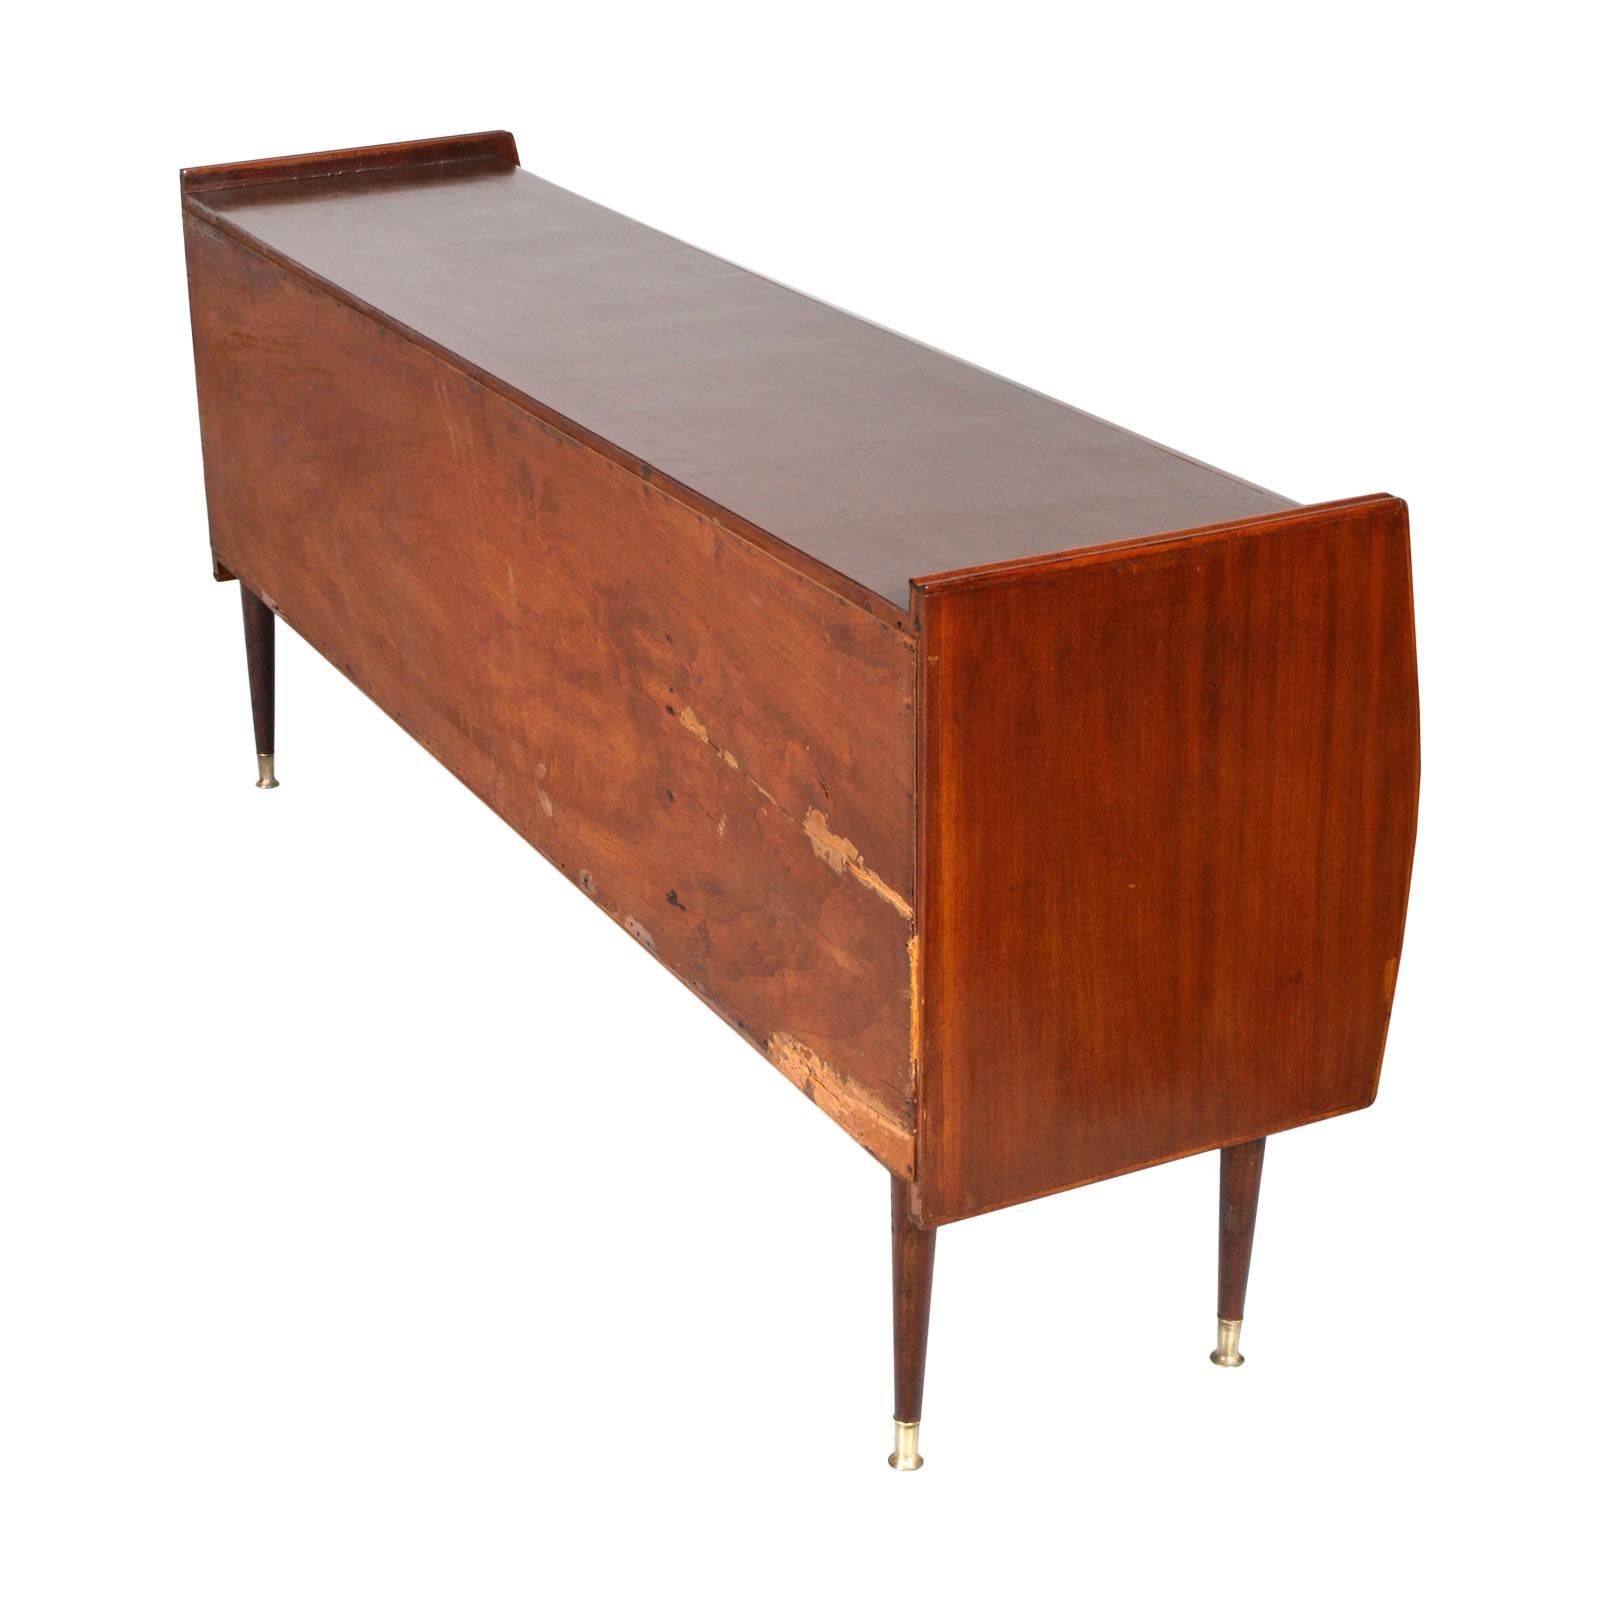 20th Century Midcentury Cabinet Art Deco from Lissone, Made in Milan, Gio Ponti Style For Sale